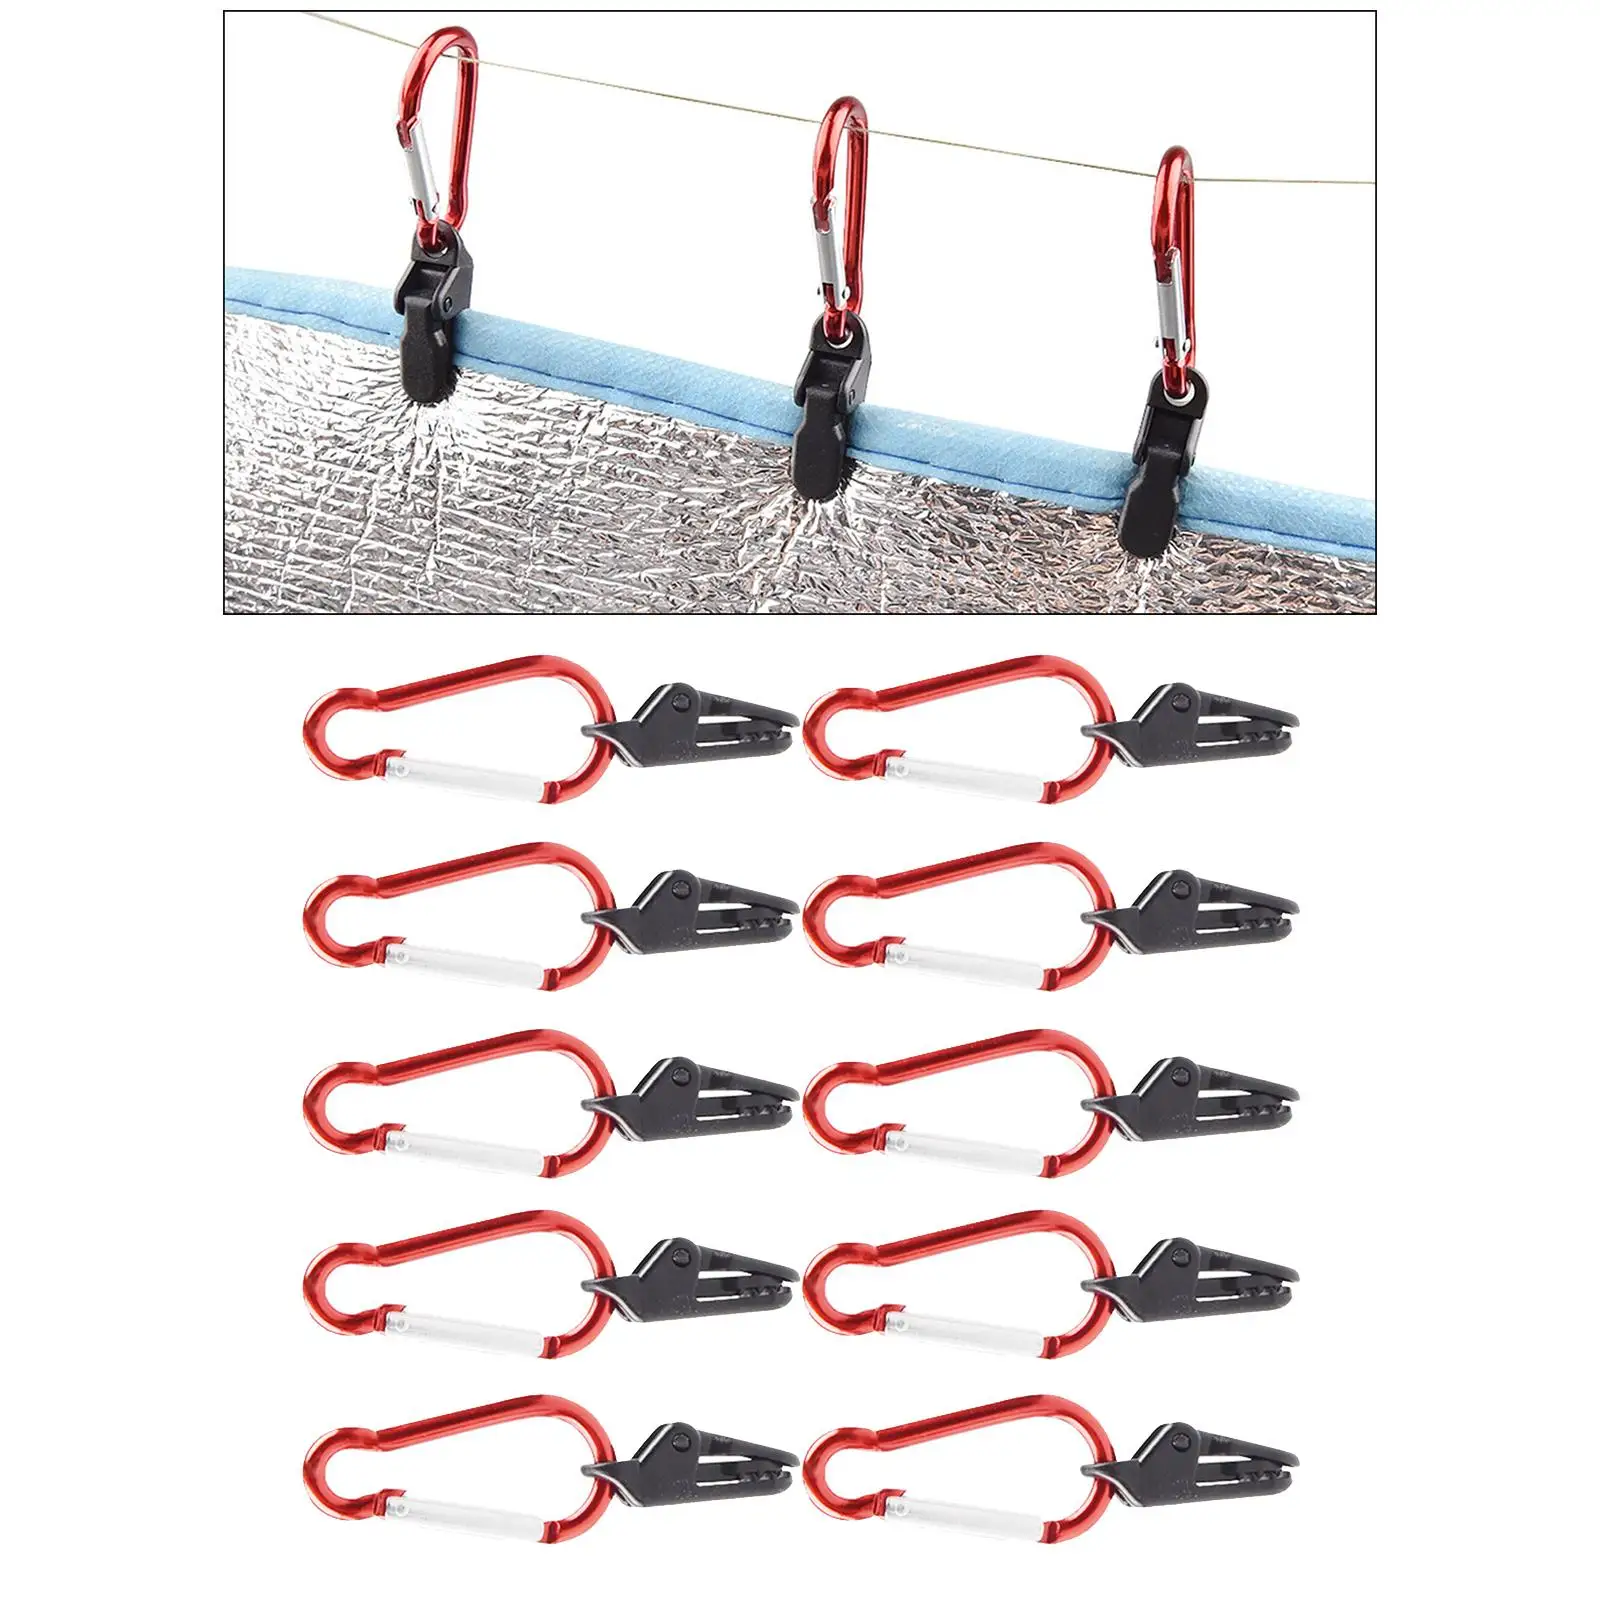 10 Pieces Heavy Duty Tent Tarp Clips Clamps D Ring Camping Canopy Carabiner